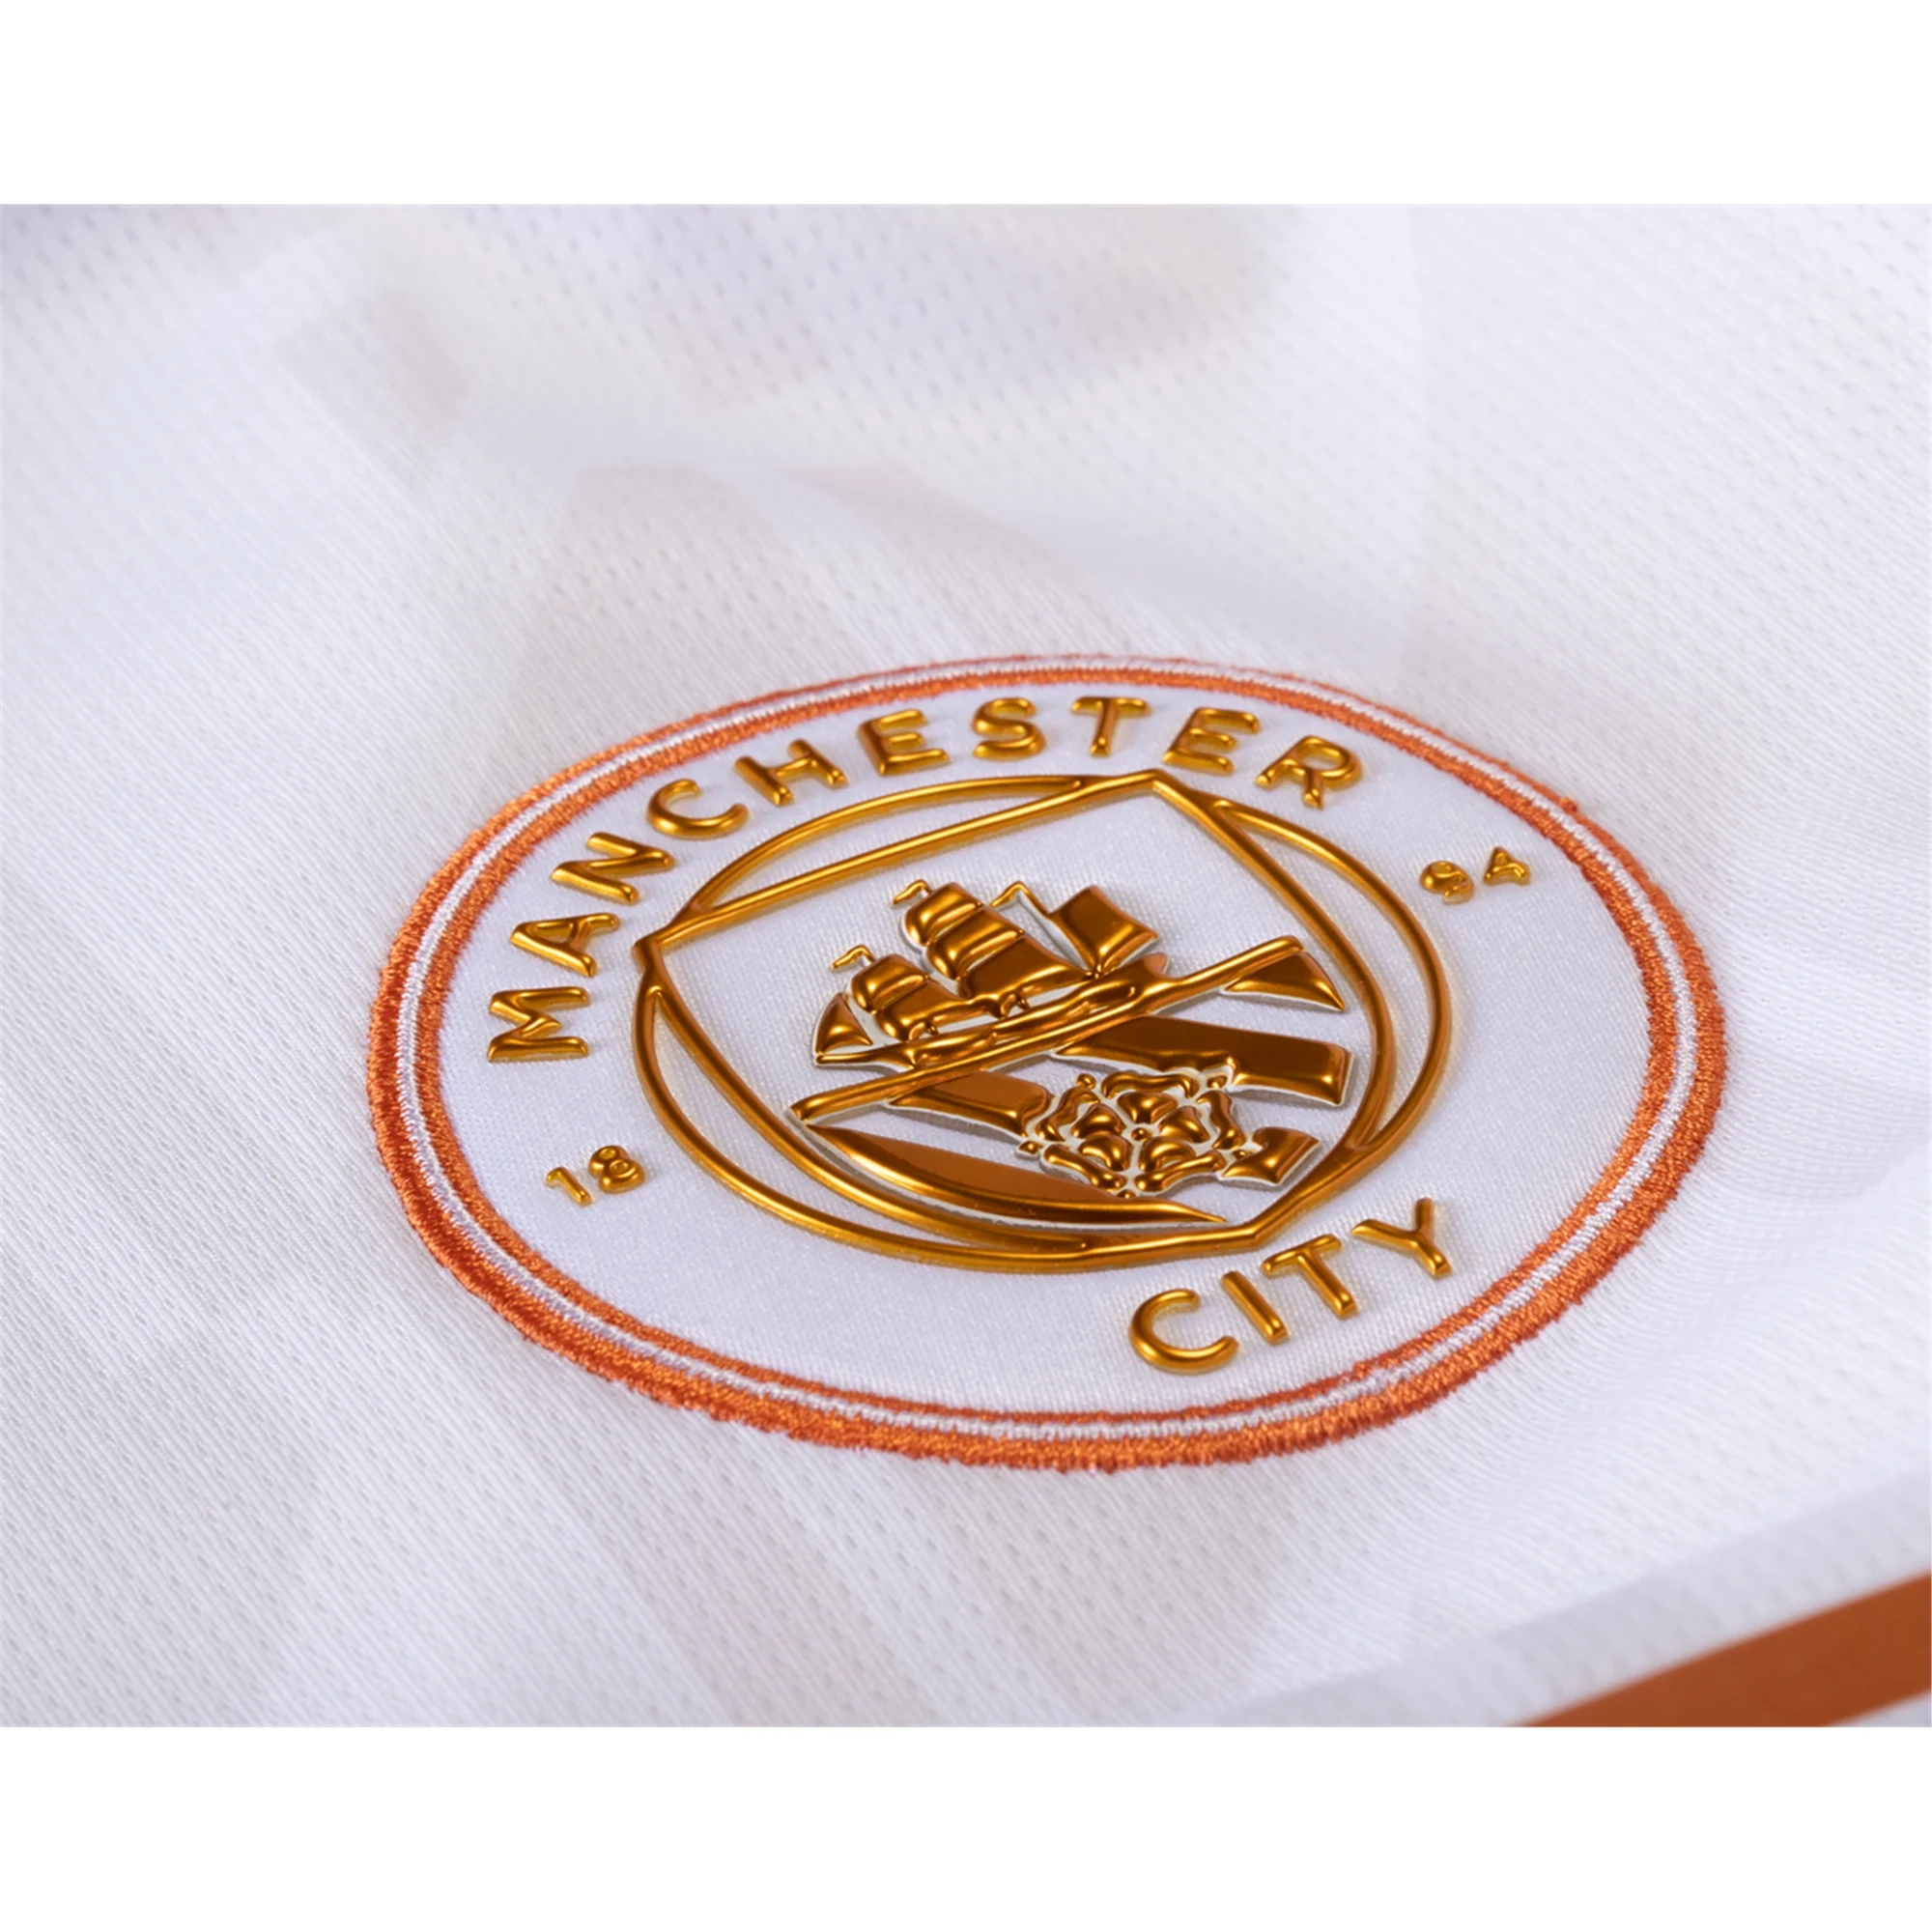 What's the Gold Badge on Manchester City's Jersey?